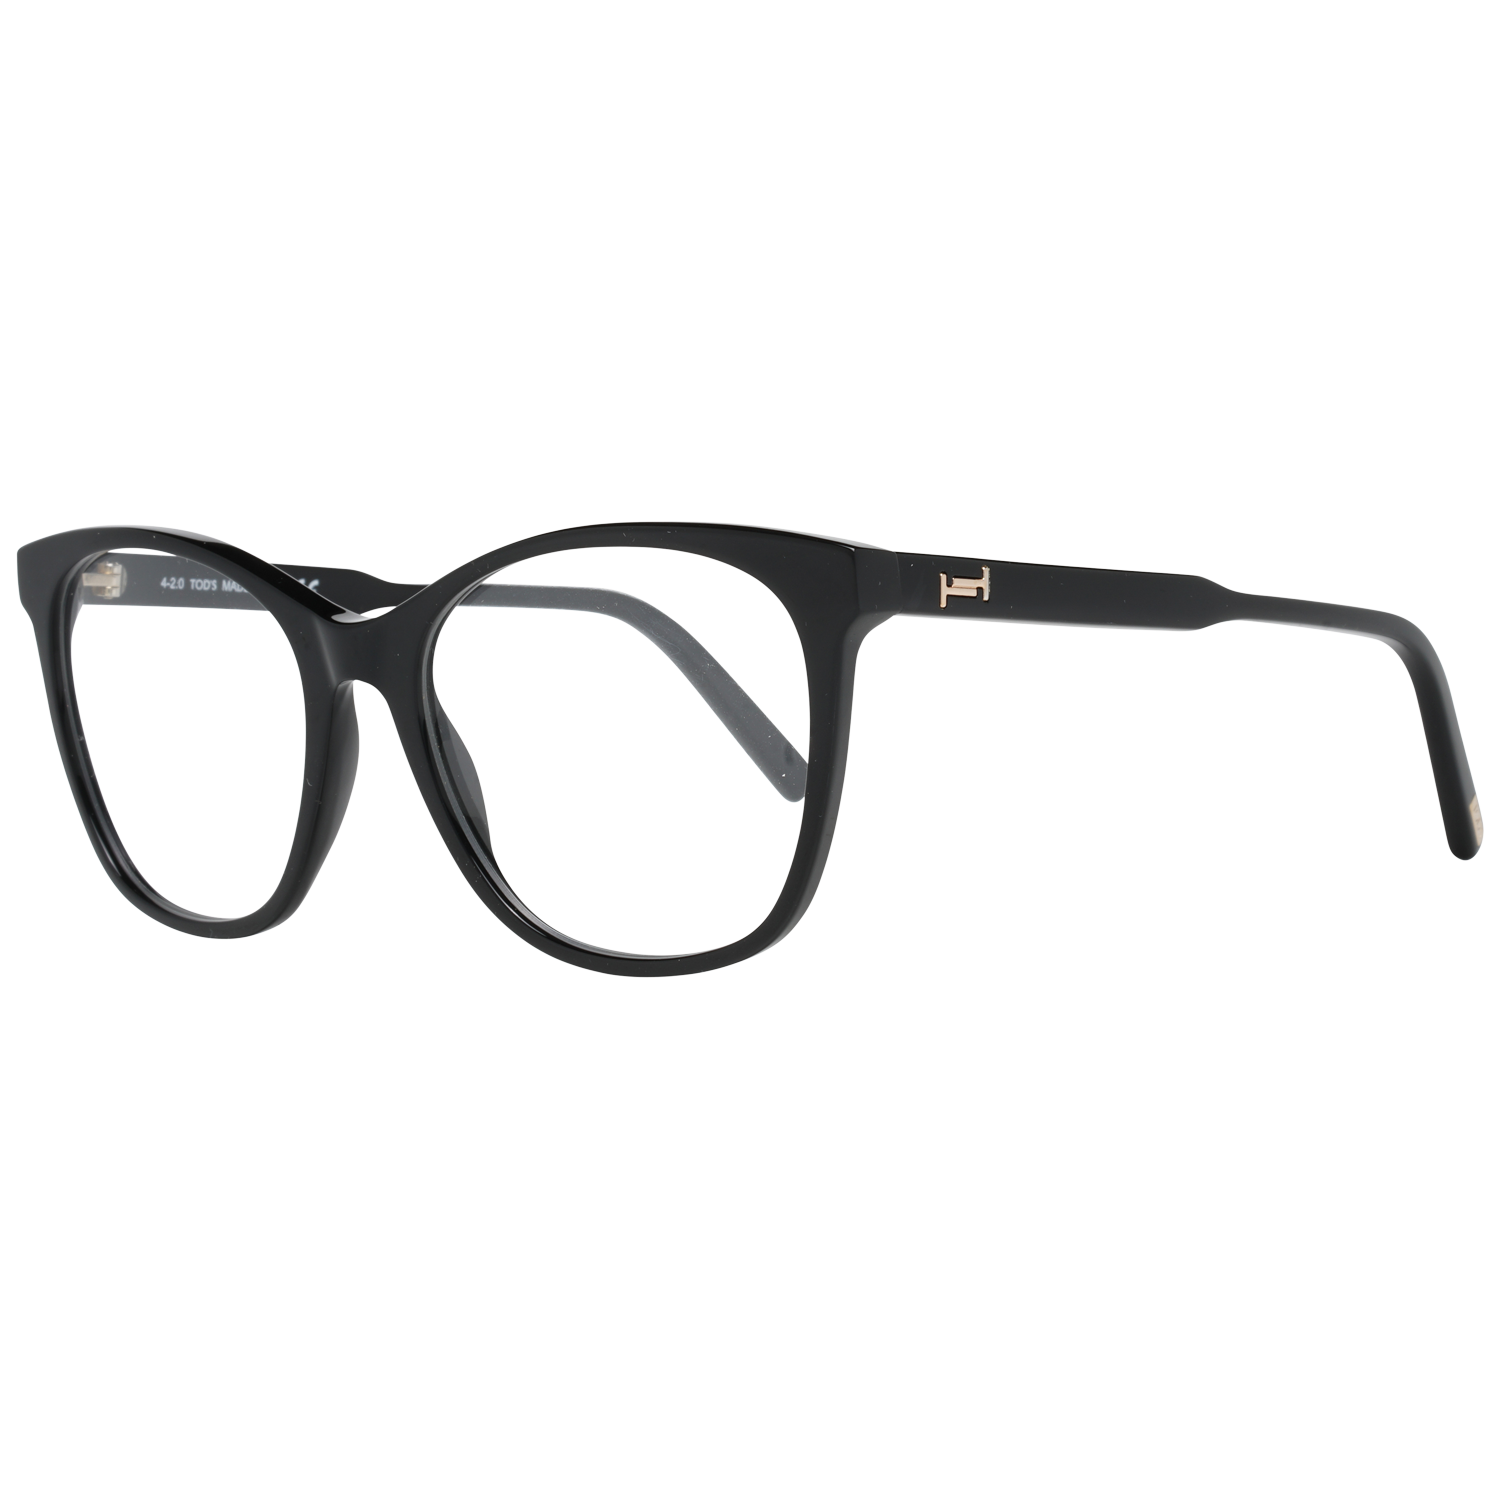 Tods Optical Frame TO5249 001 53 Black